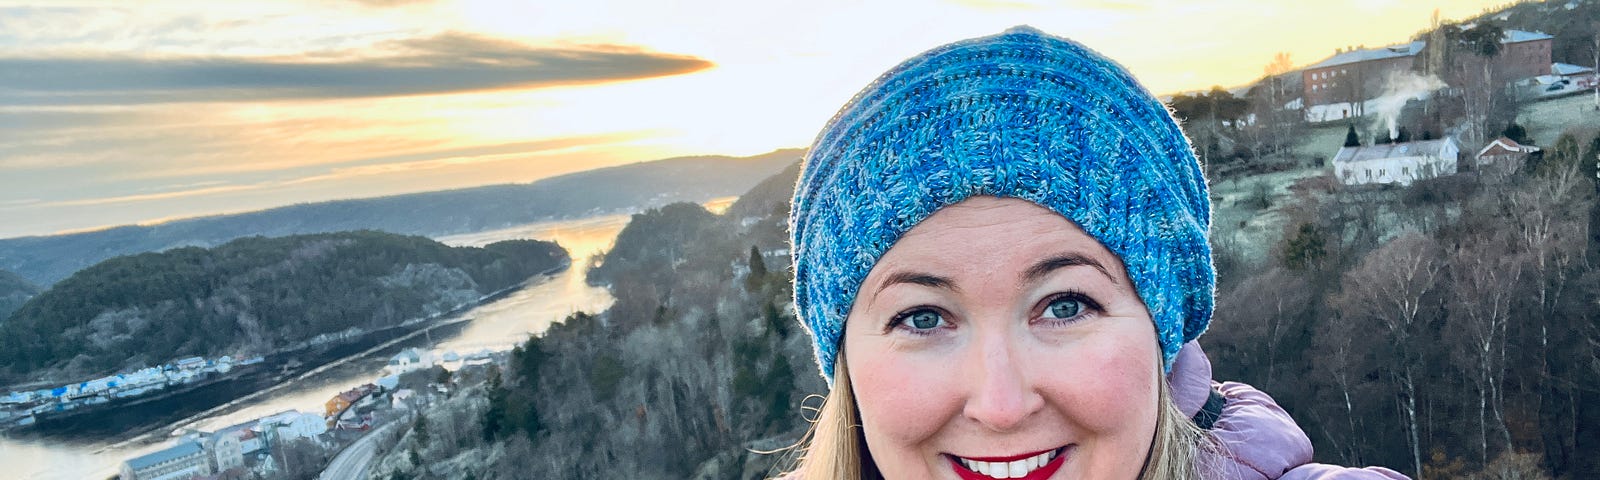 selfie of author in Halden, Norway with a scenic sunset background on a mountain with water below